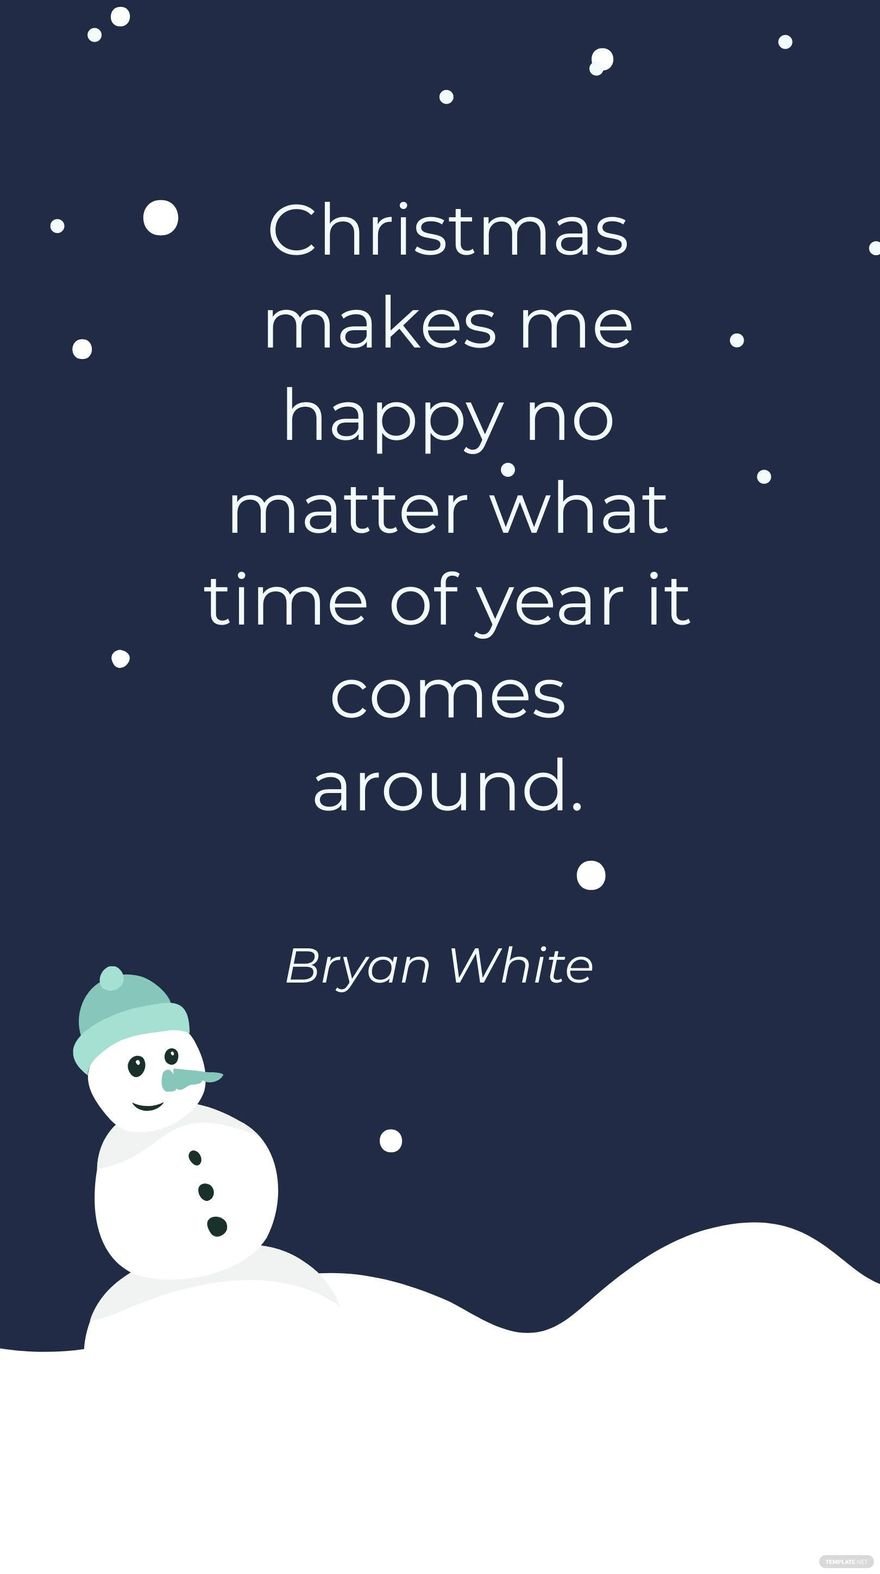 Free Bryan White - Christmas makes me happy no matter what time of year it comes around. in JPG